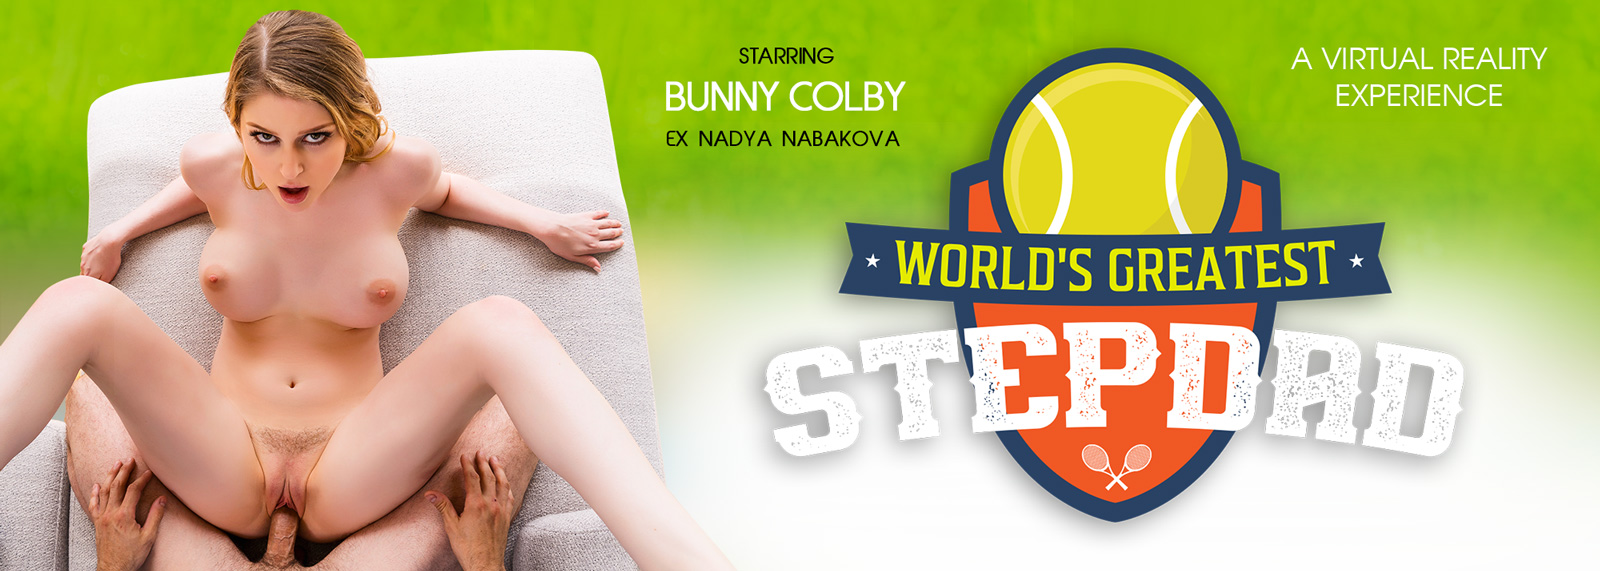 World's Greatest Stepdad with Bunny Colby  Slideshow